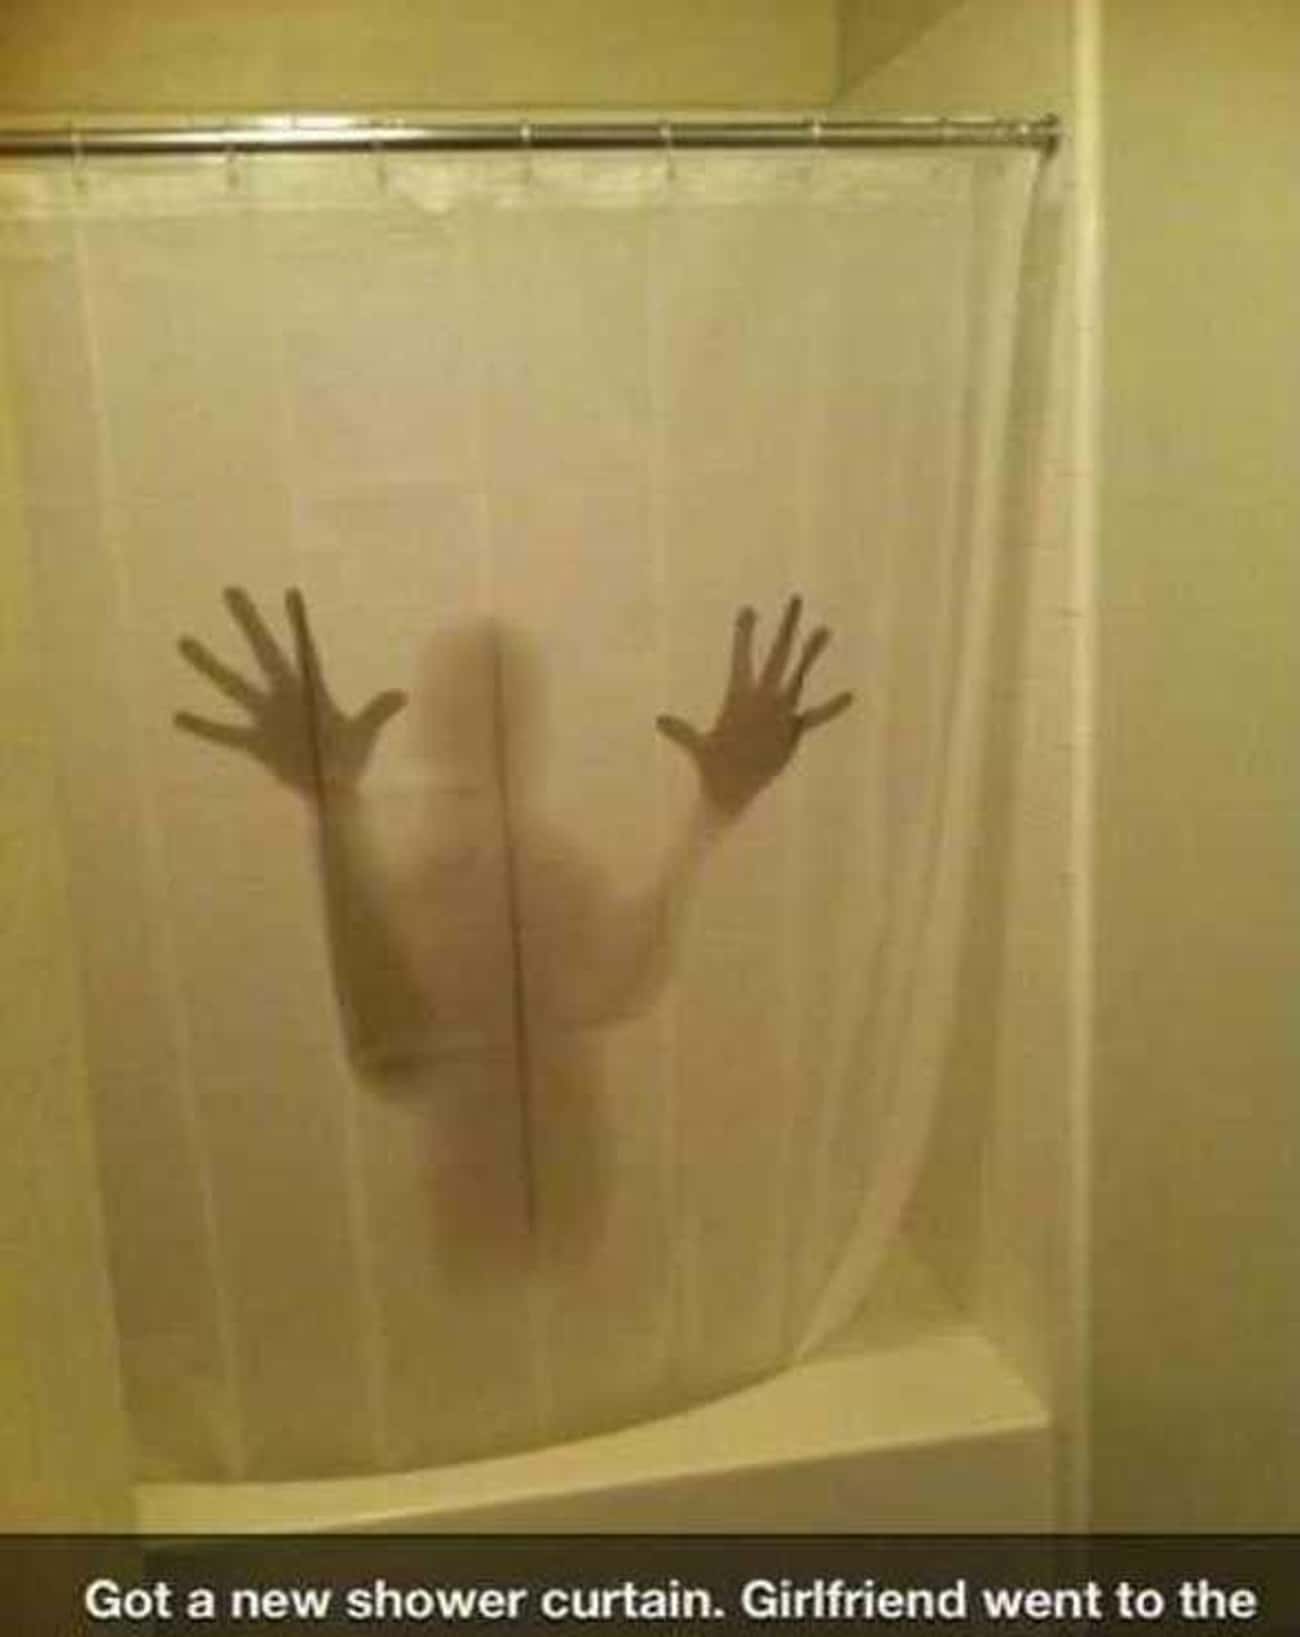 The Shower Curtain Made of Nightmares